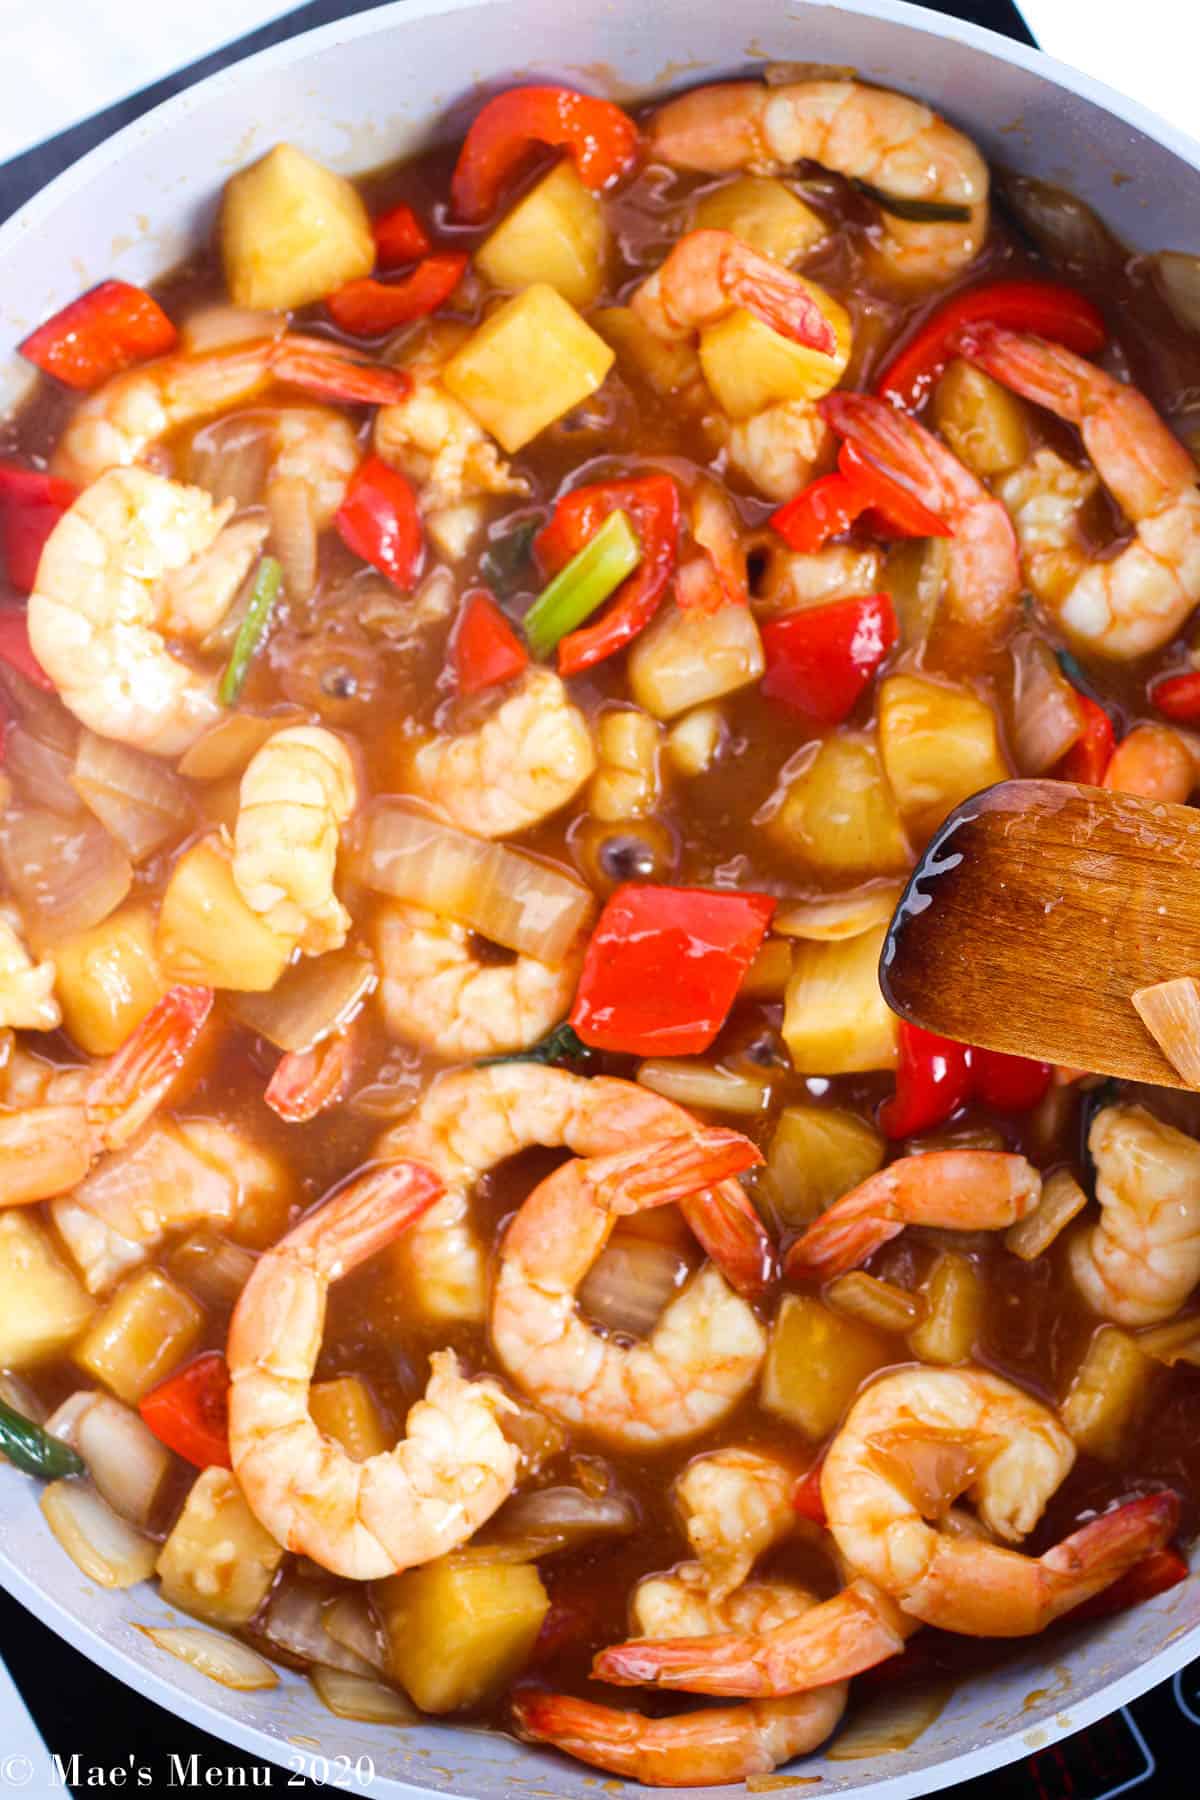 THe finished sweet and sour shrimp in a large nonstick pan with a wooden spoon on the side